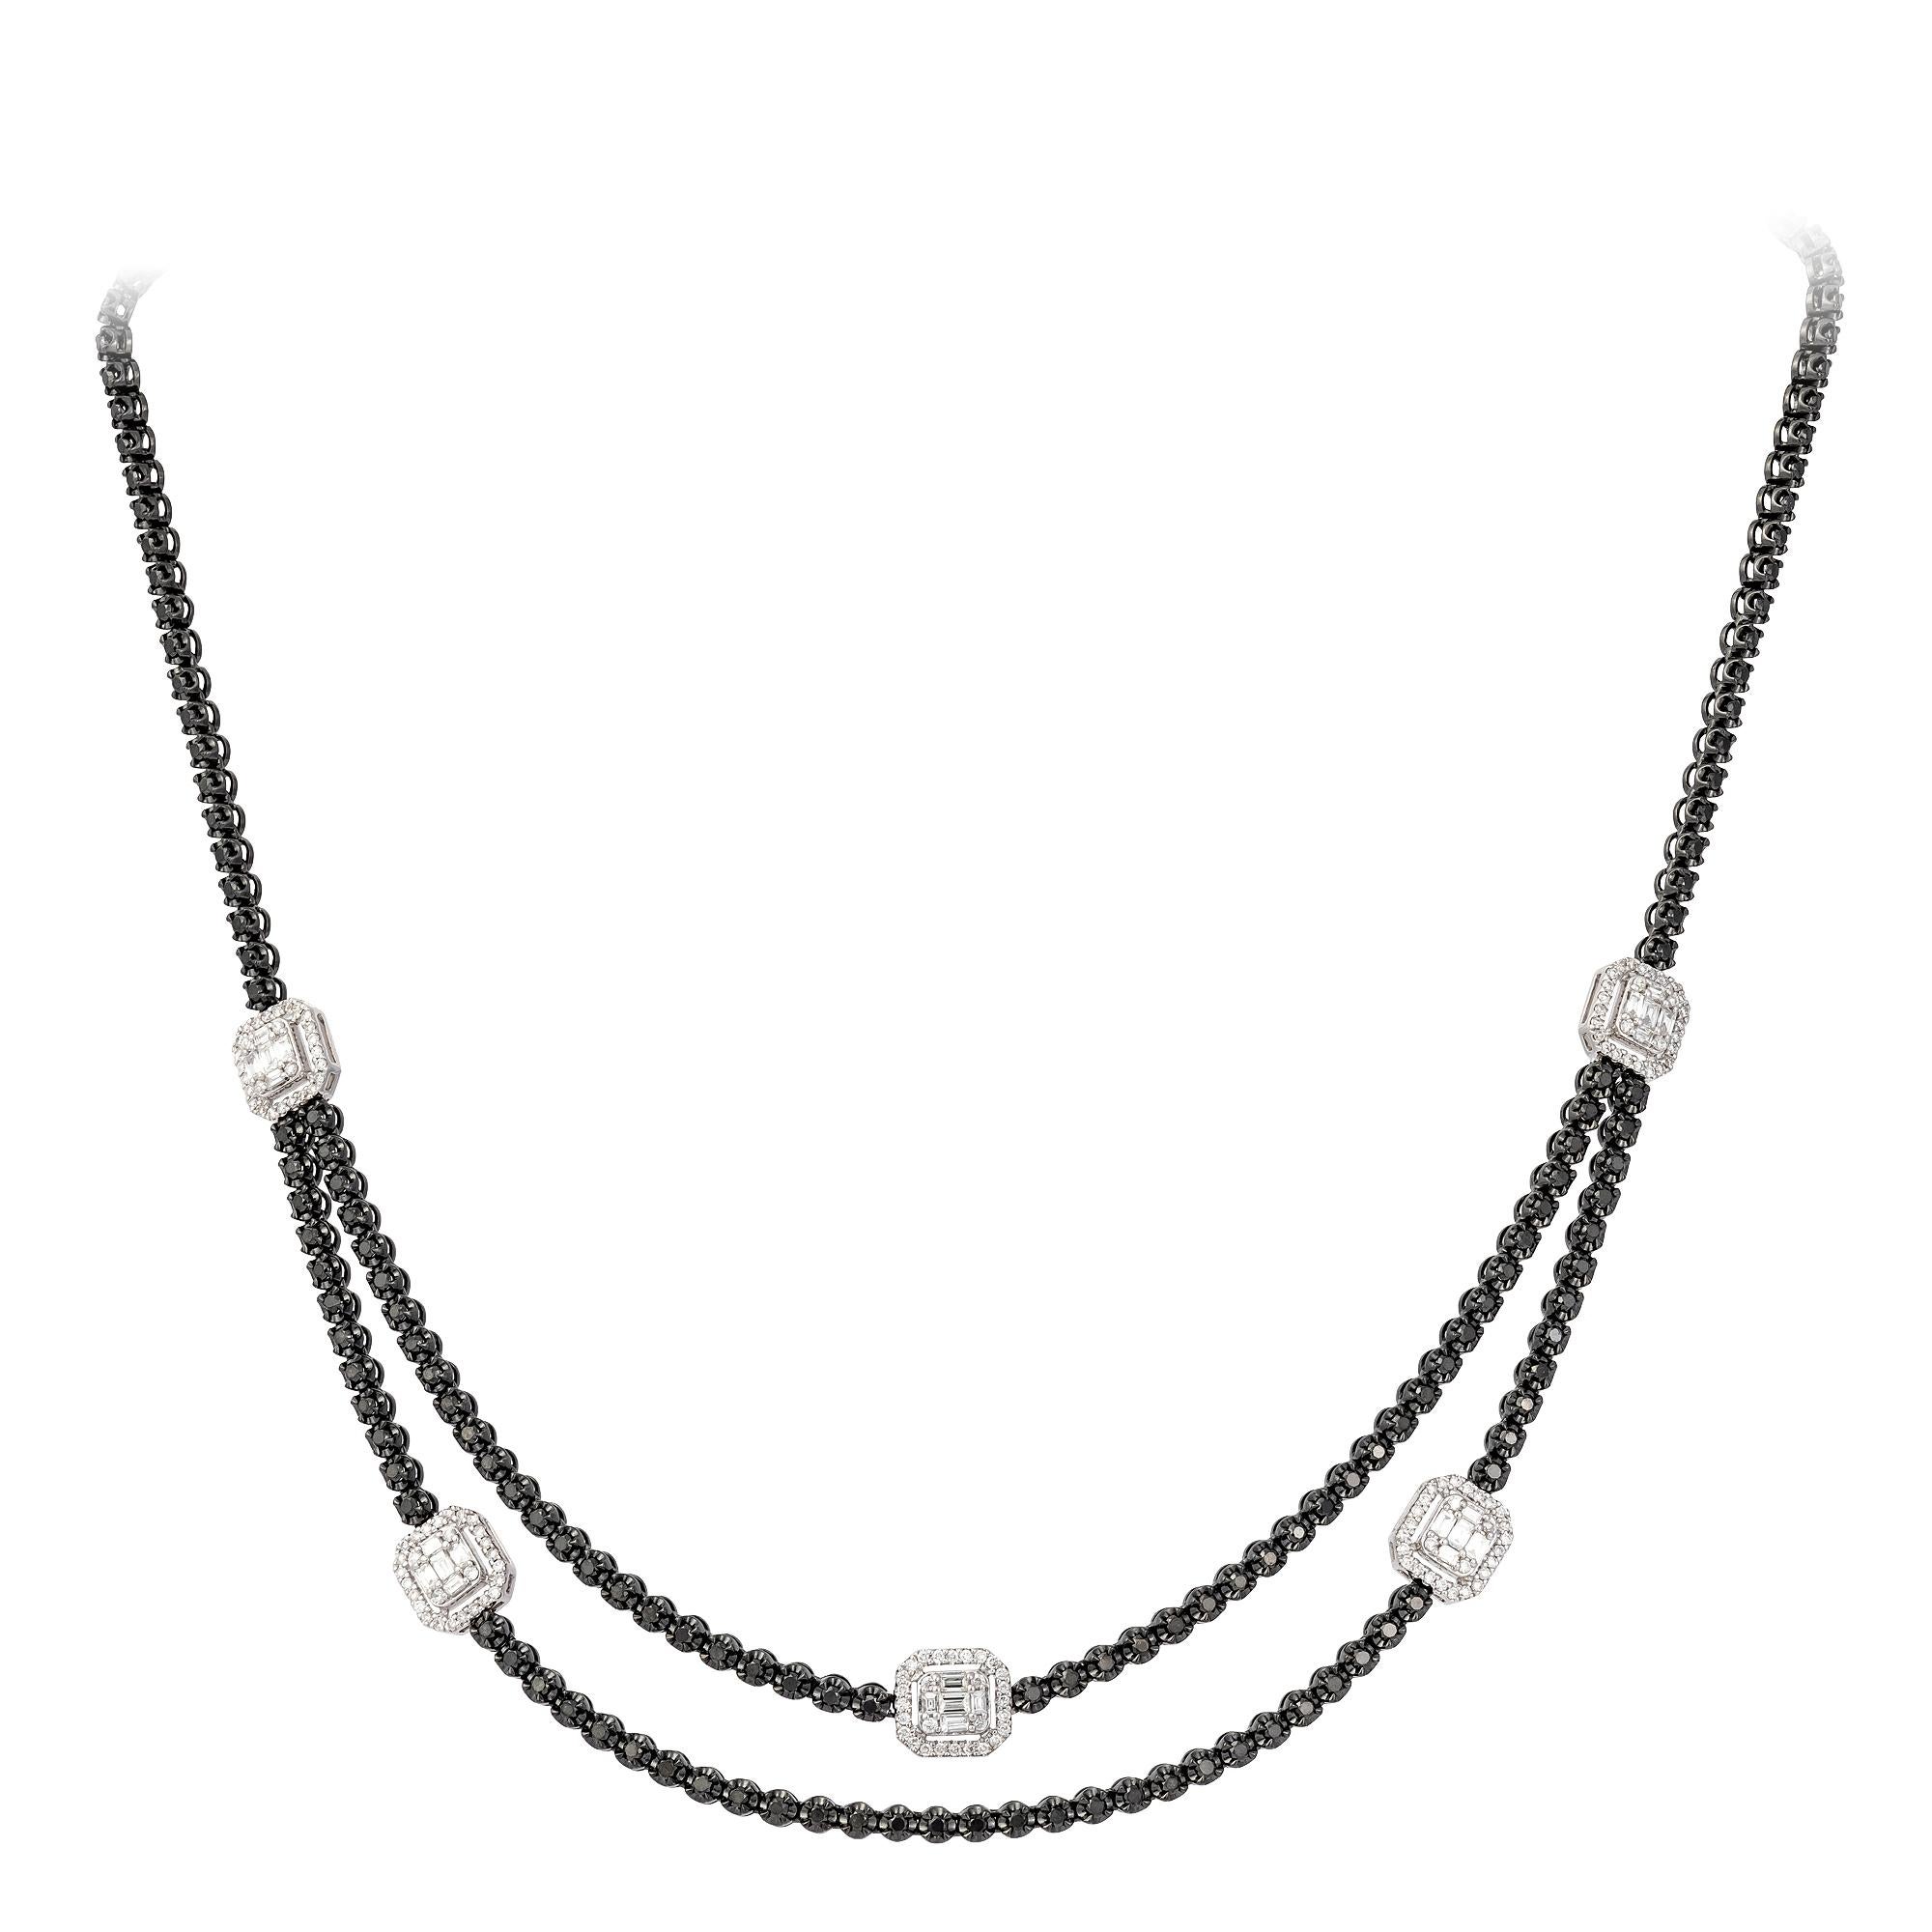 The Following Item we are offering is a Rare 18KT Gold Rare Fancy Black Diamond White Diamond Baguette Double Strand Necklace. Beautifully comprised of Finely Set Gorgeous Round Black Diamonds and Adorned with Large Baguette Cut White Diamond